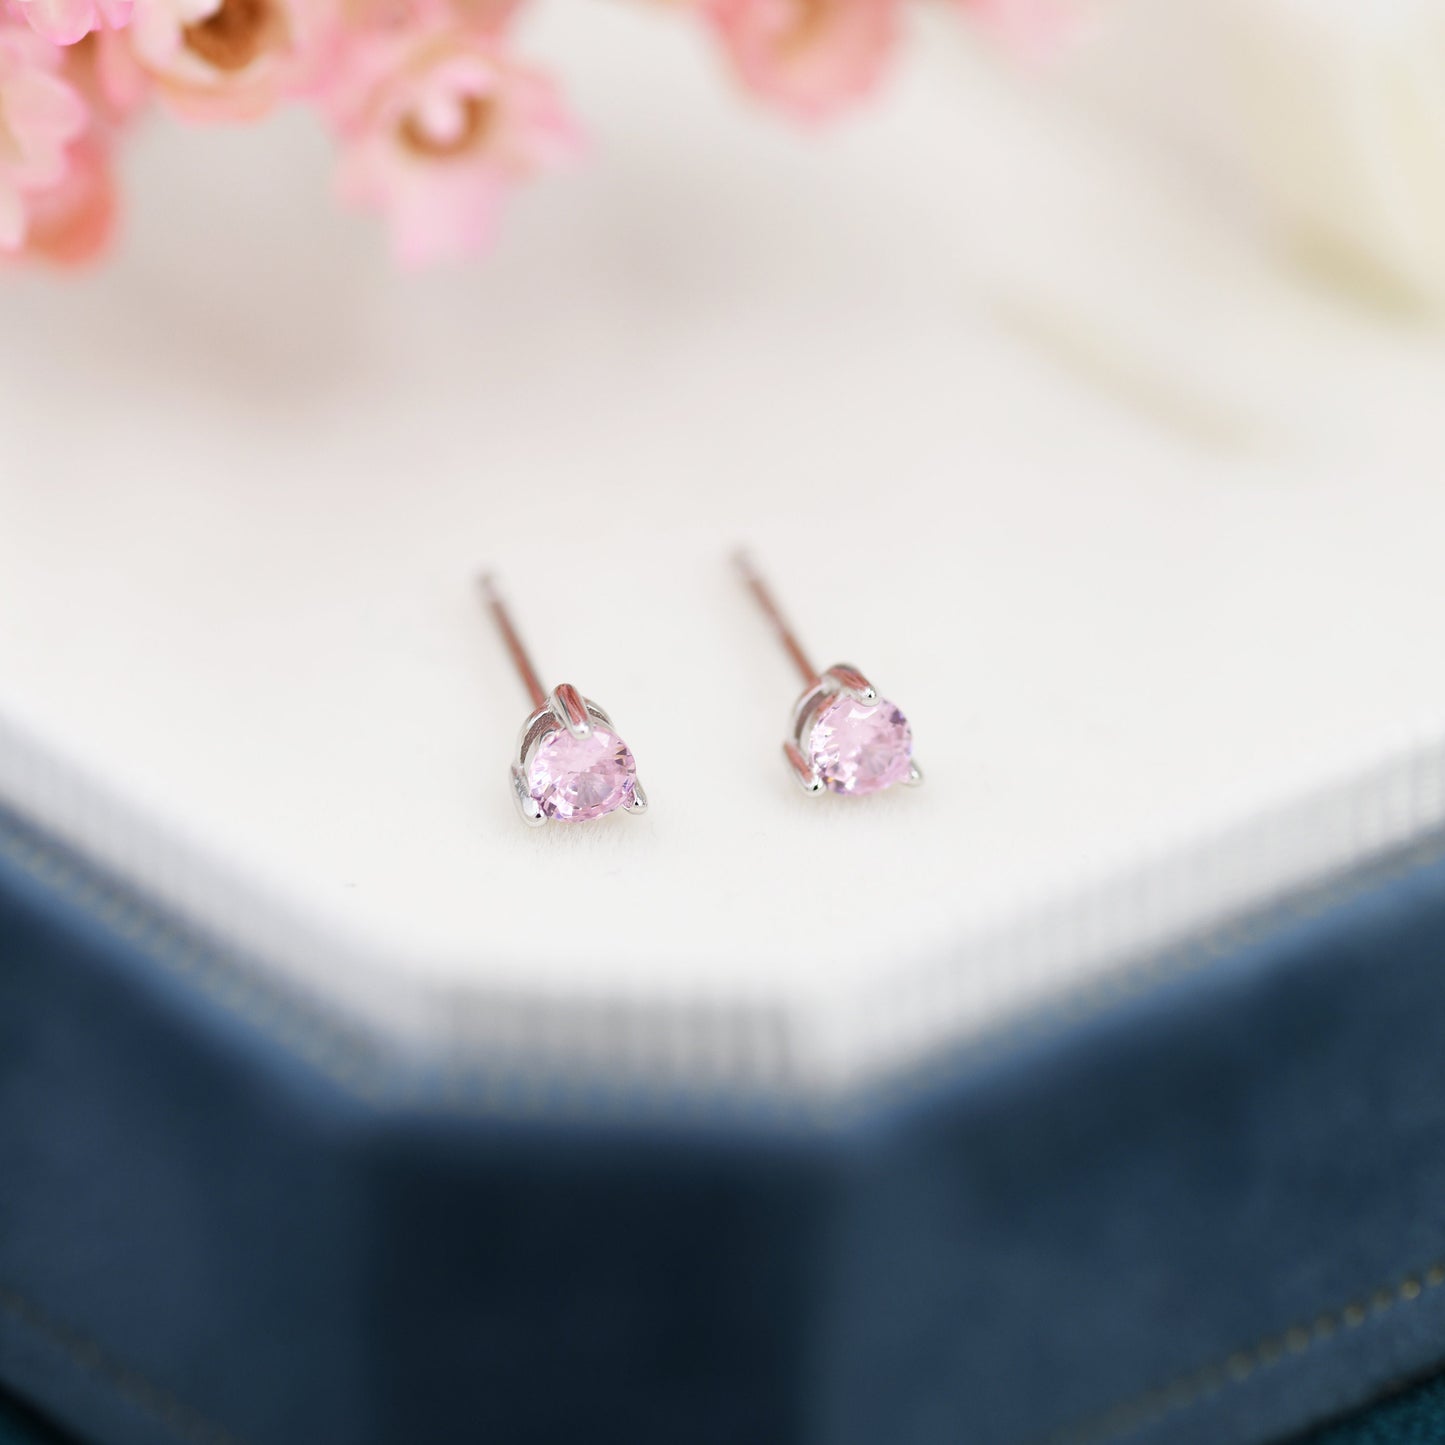 Pink CZ Stud Earrings in Sterling Silver, Silver or Gold, 3mm, Three Prong, Pink Stacking Earrings, October Birthstone